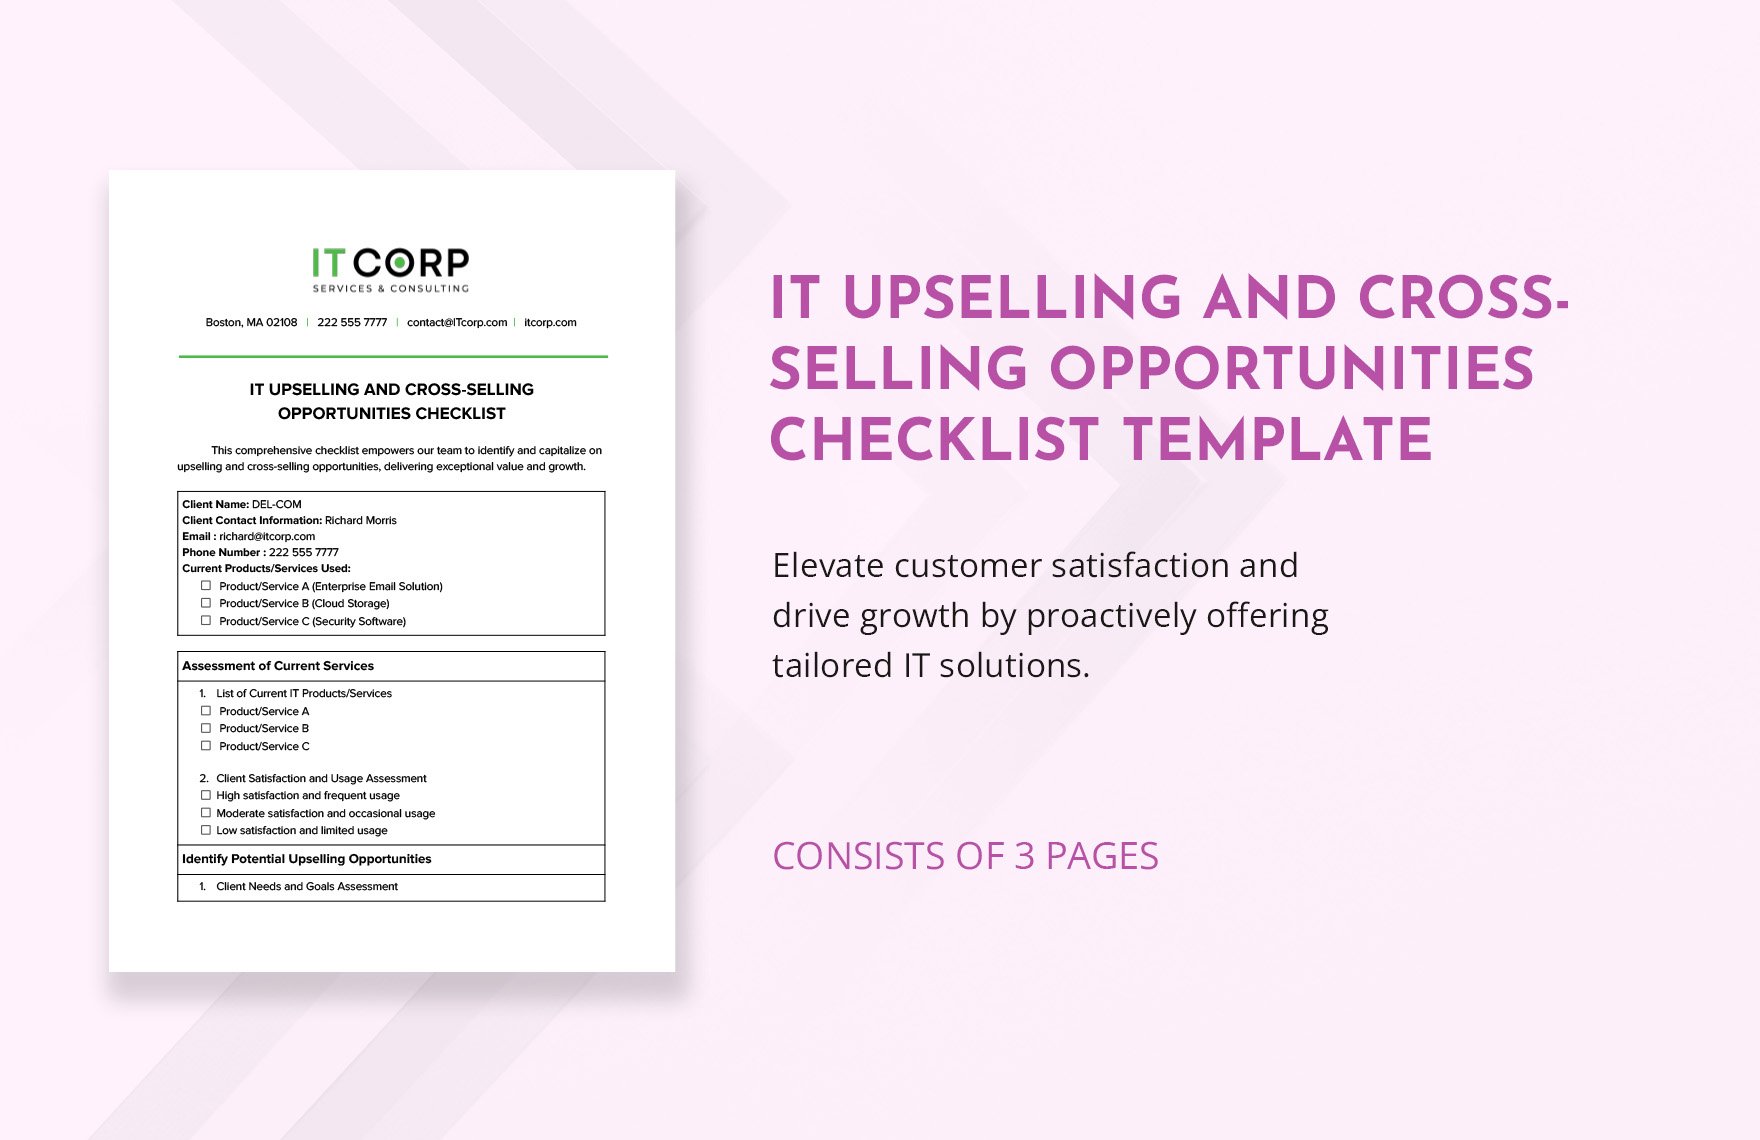 IT Upselling and Cross-Selling Opportunities Checklist Template